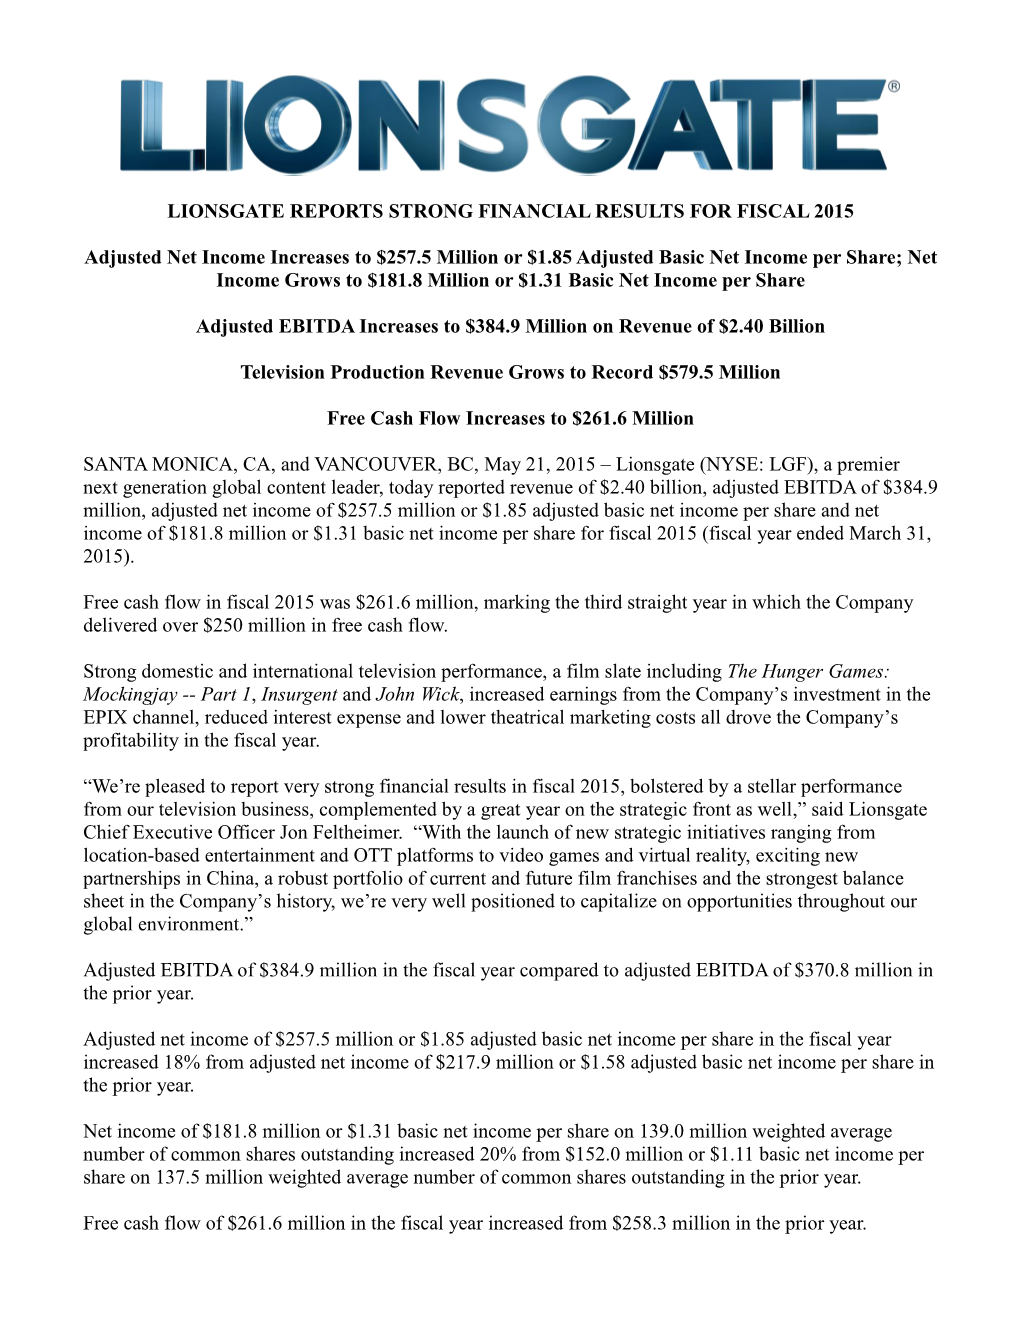 Lionsgate Reports Strong Financial Results for Fiscal 2015